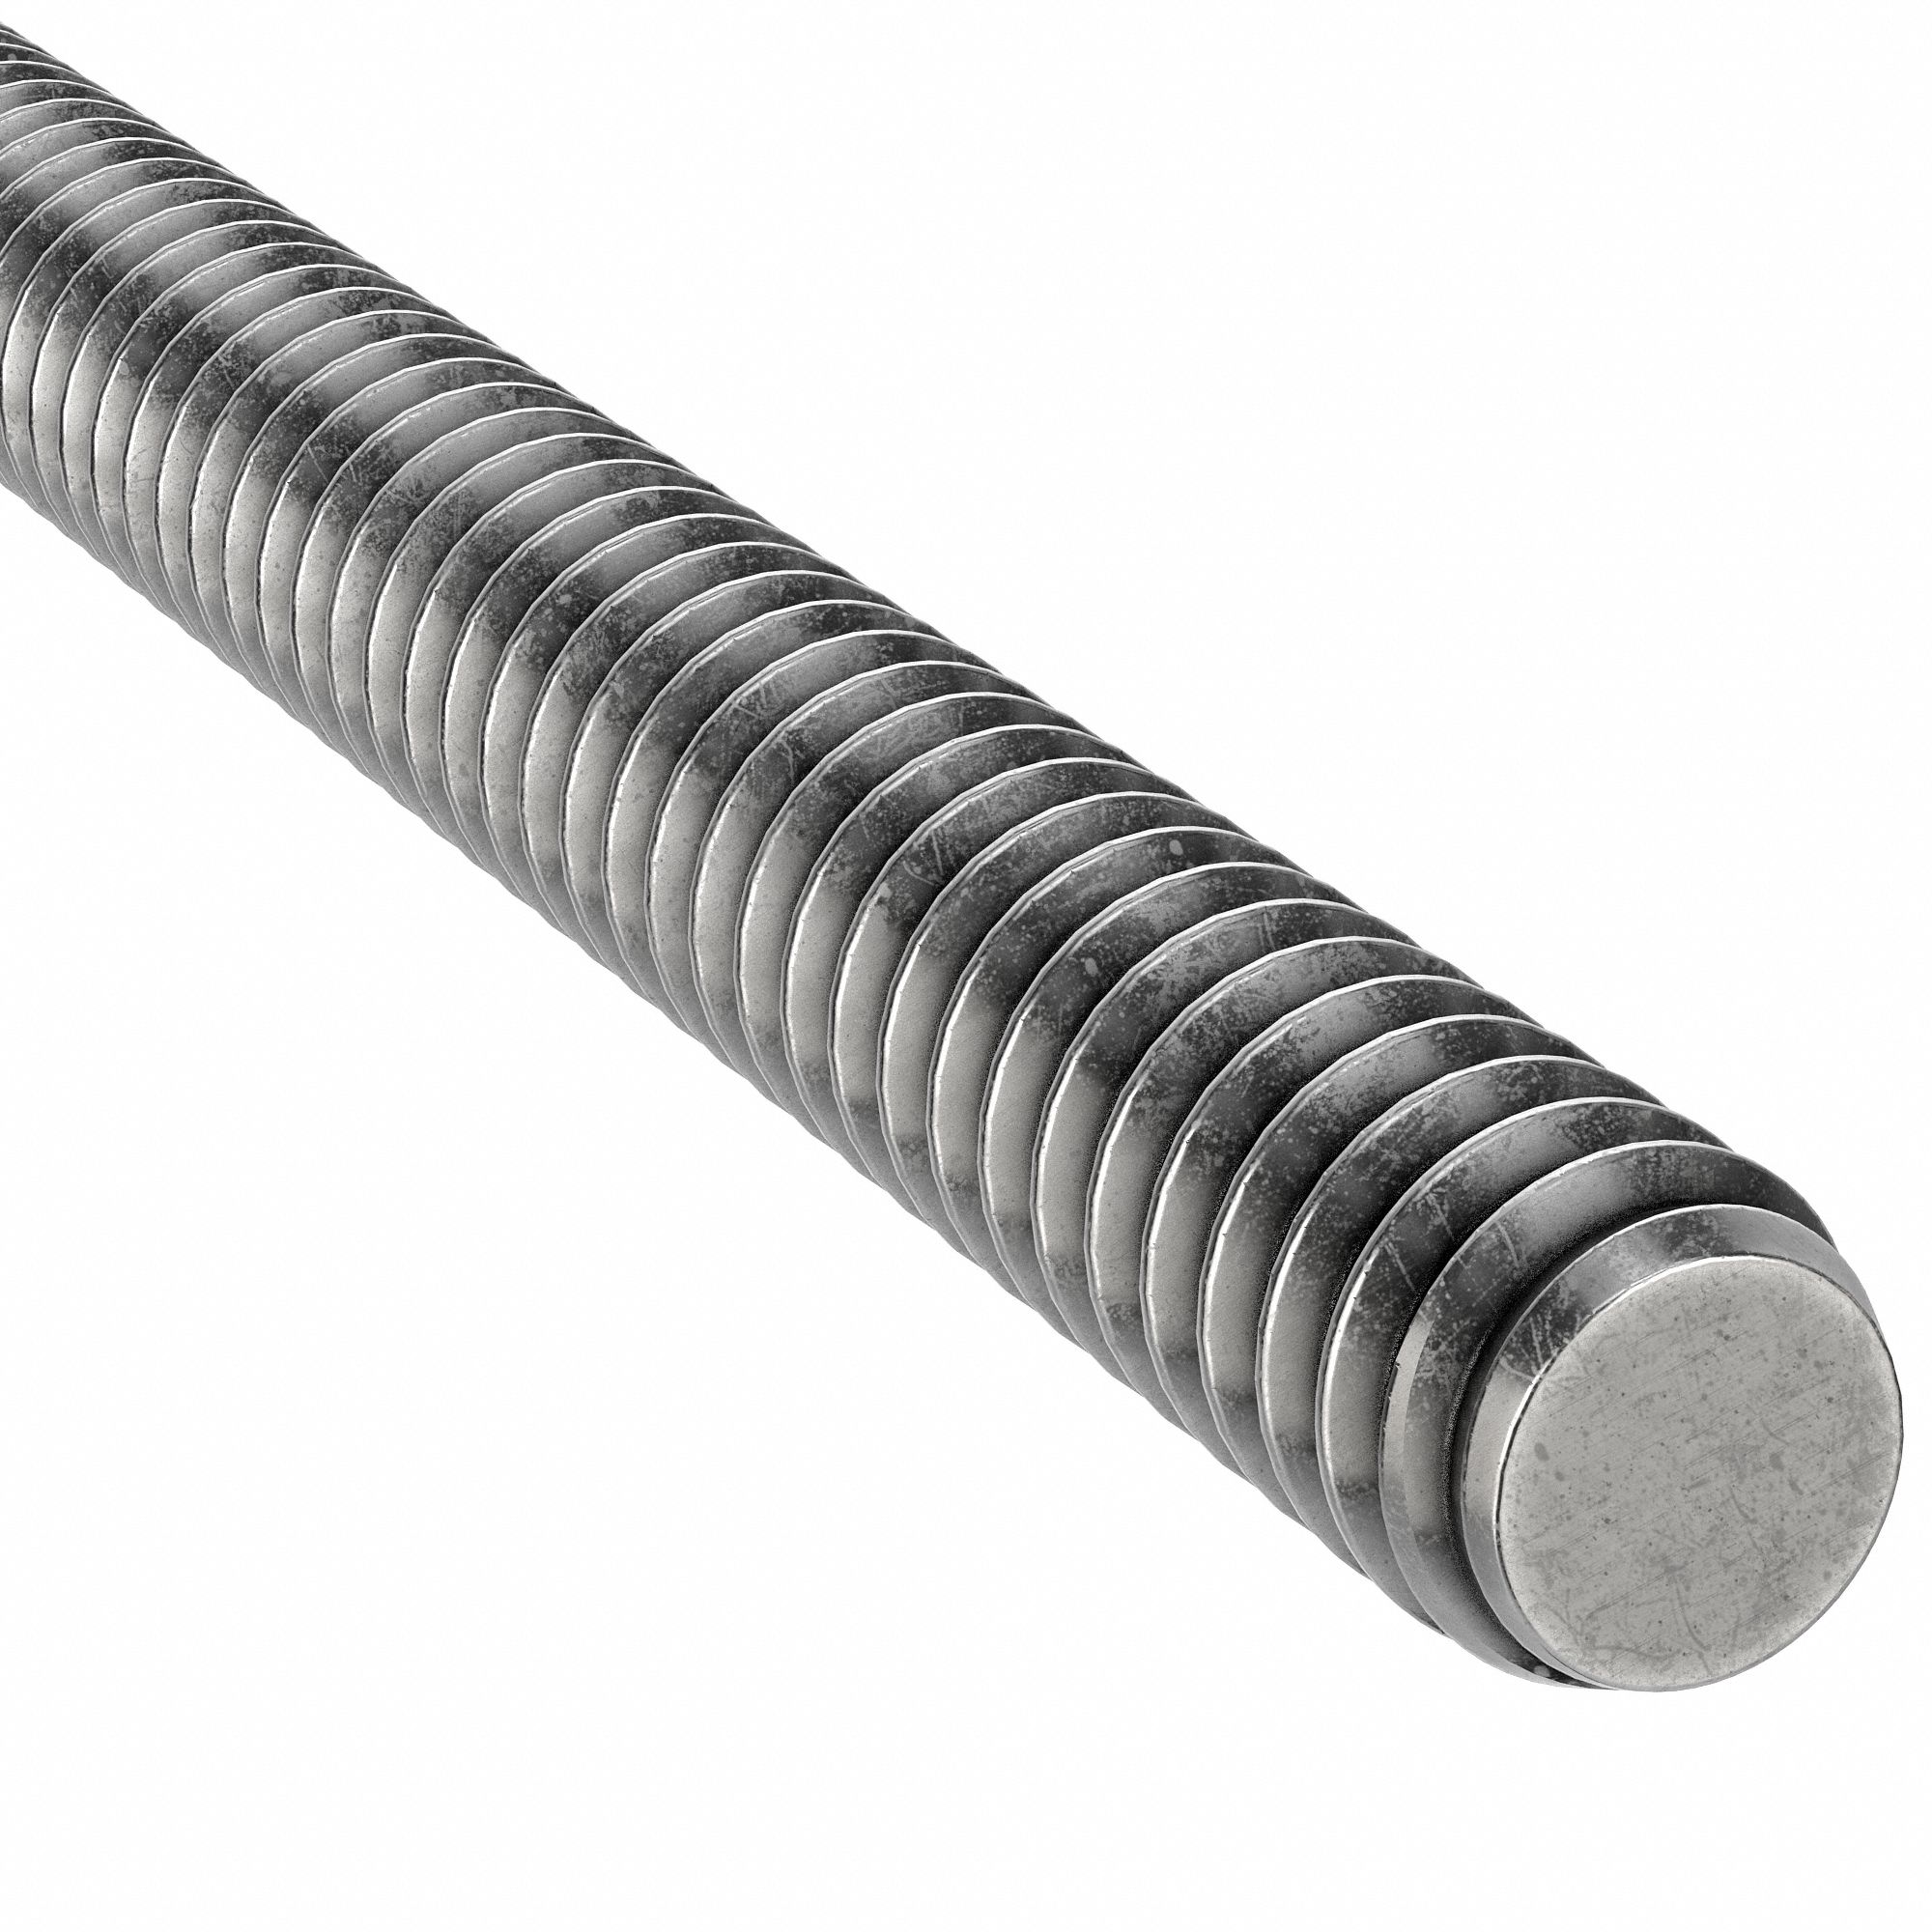 M6 M8 Fully Threaded Rod Bar Stud for Furniture Connection Color Zinc Plated